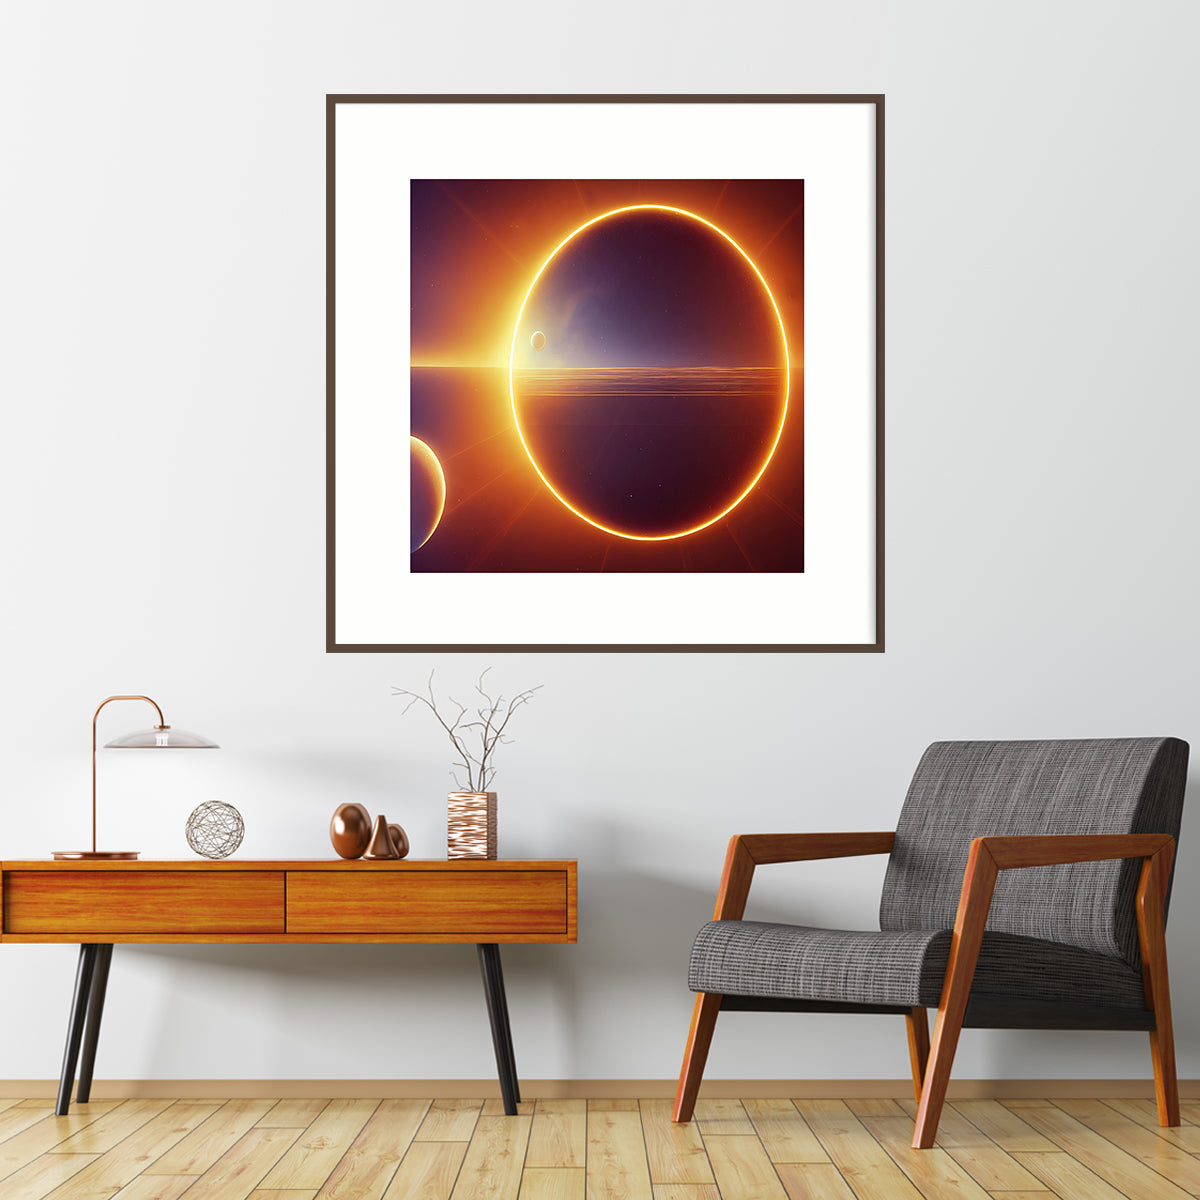 Sunshine in Space Posters And Wall Art Prints For Room-Square Posters NOT FRAMED-CetArt-8″x8″ inches-CetArt